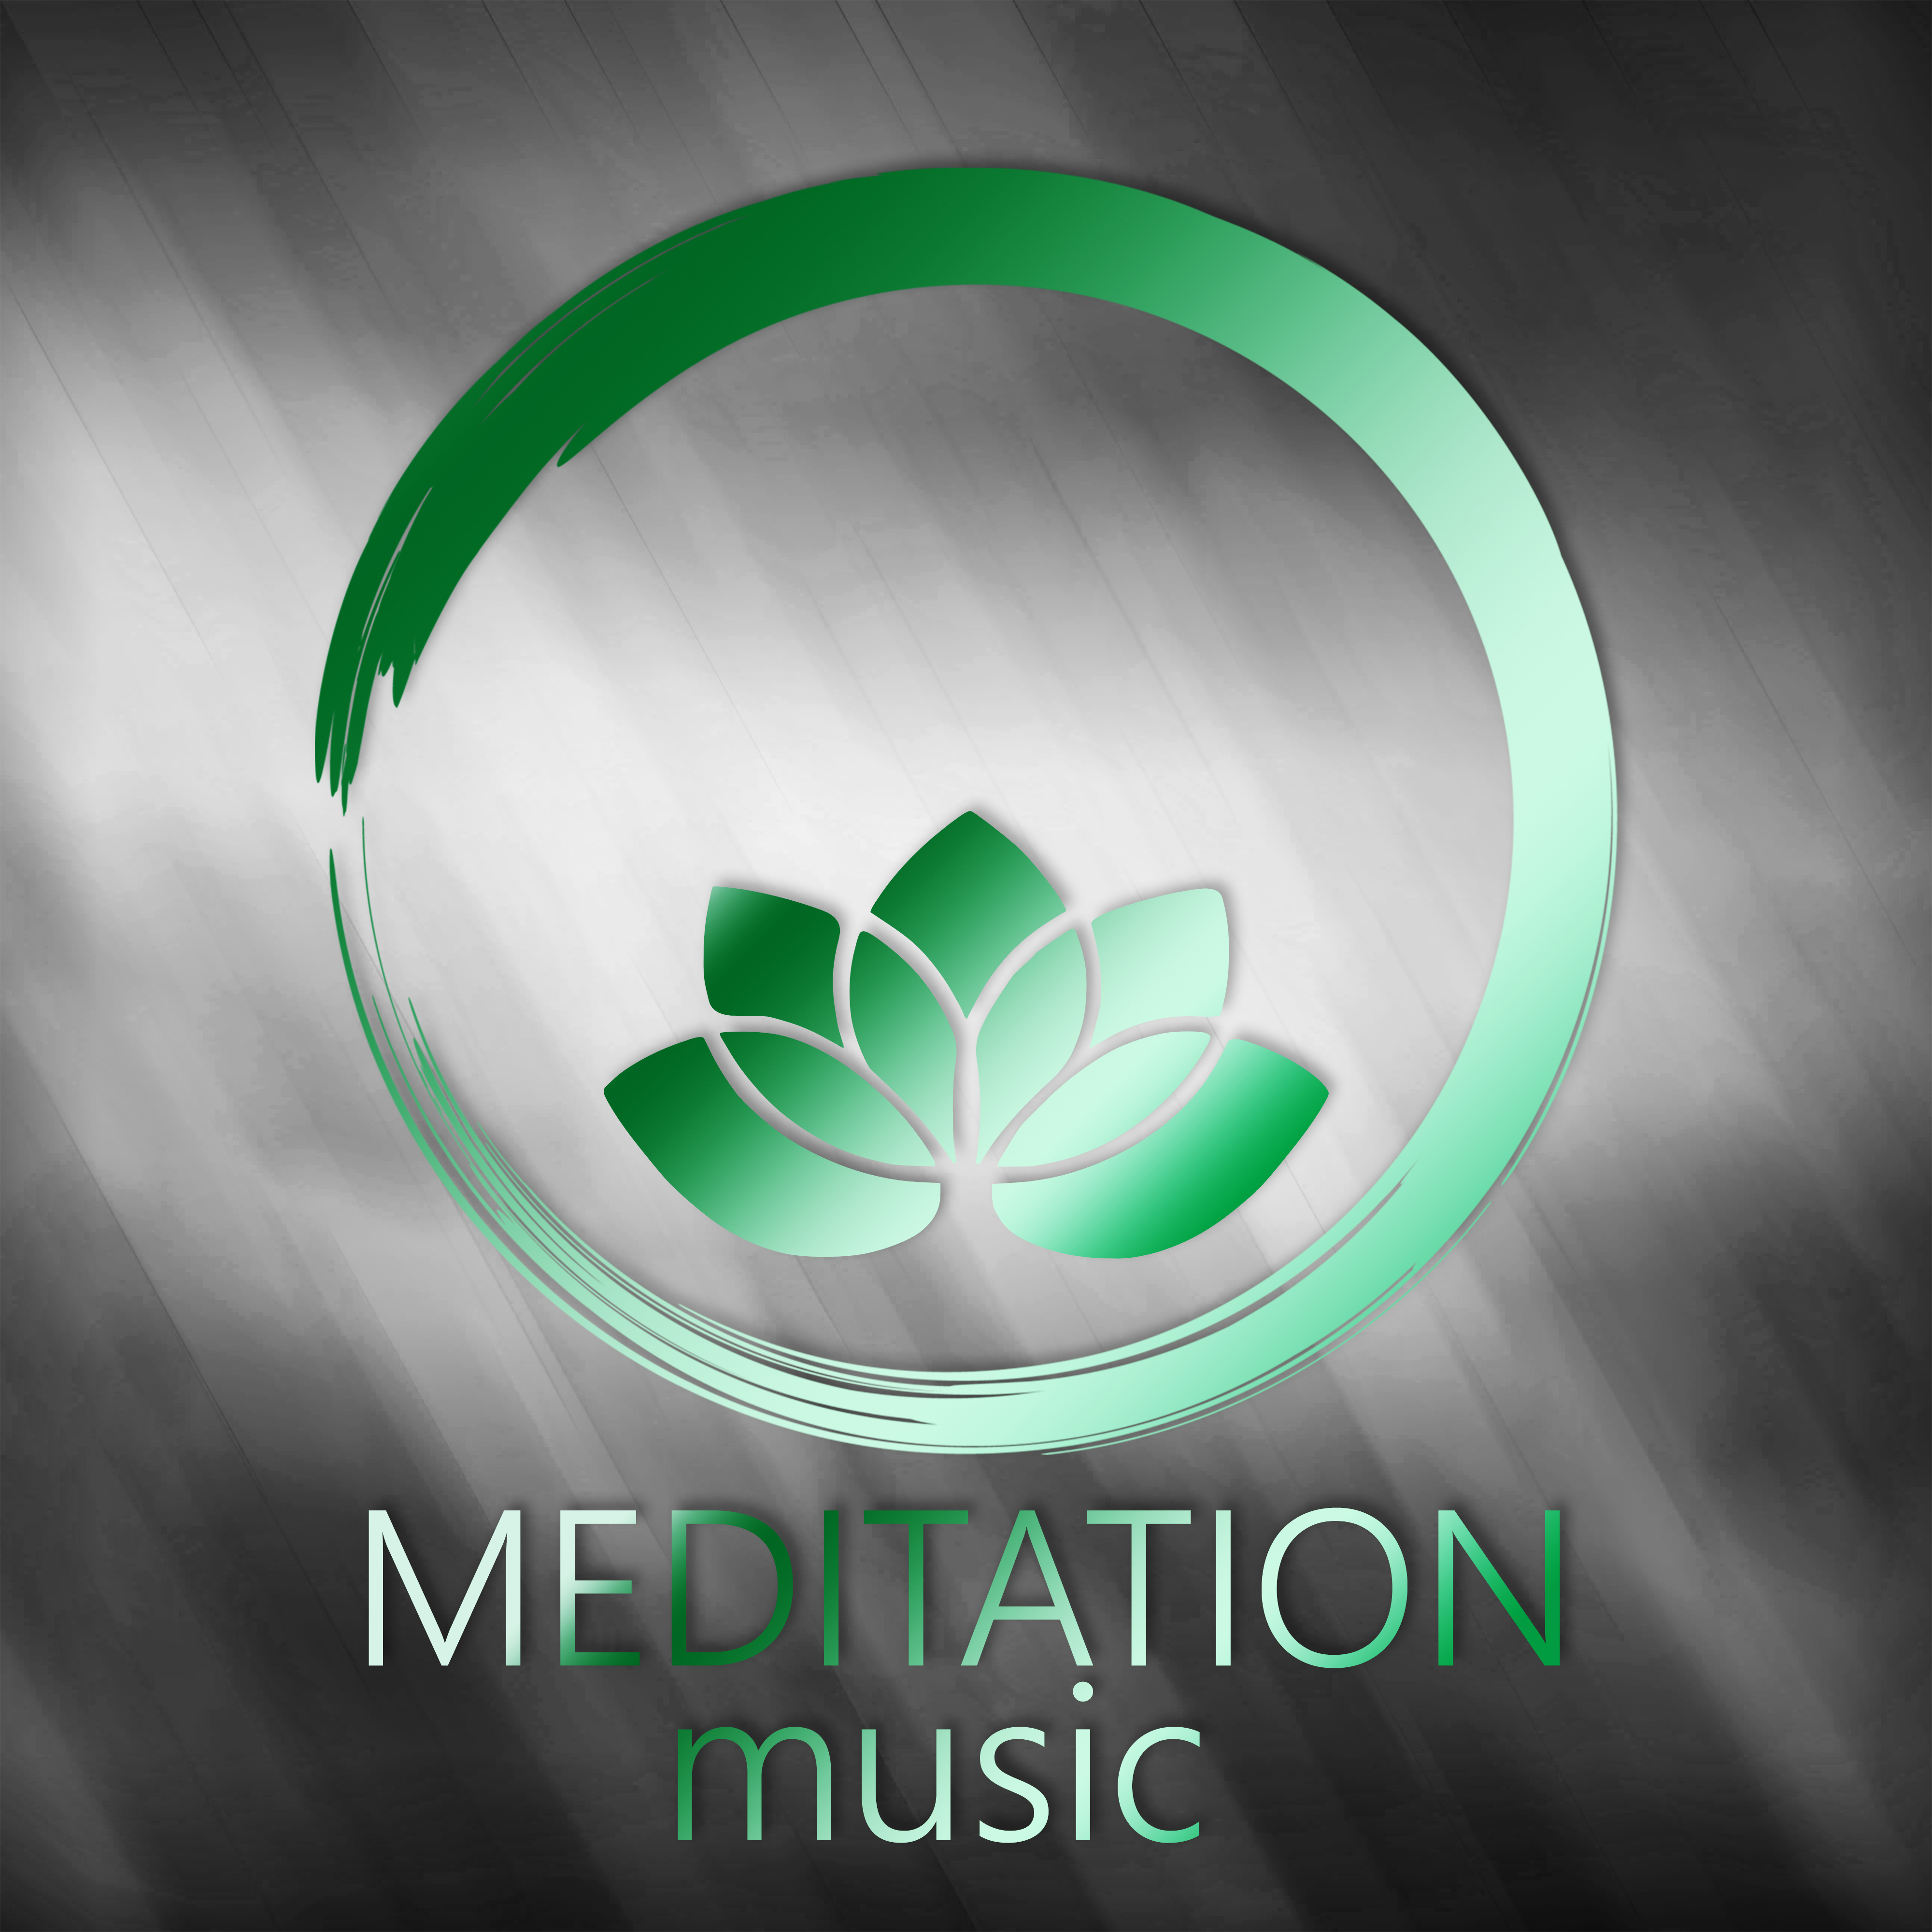 Meditation Music - Relaxing Nature Sounds, Mindfulness Meditation, Yoga Poses, Harmony of Senses, Stress Relief, Ocean Waves & Healing Touch, Sensual Massage Music for Aromatherapy